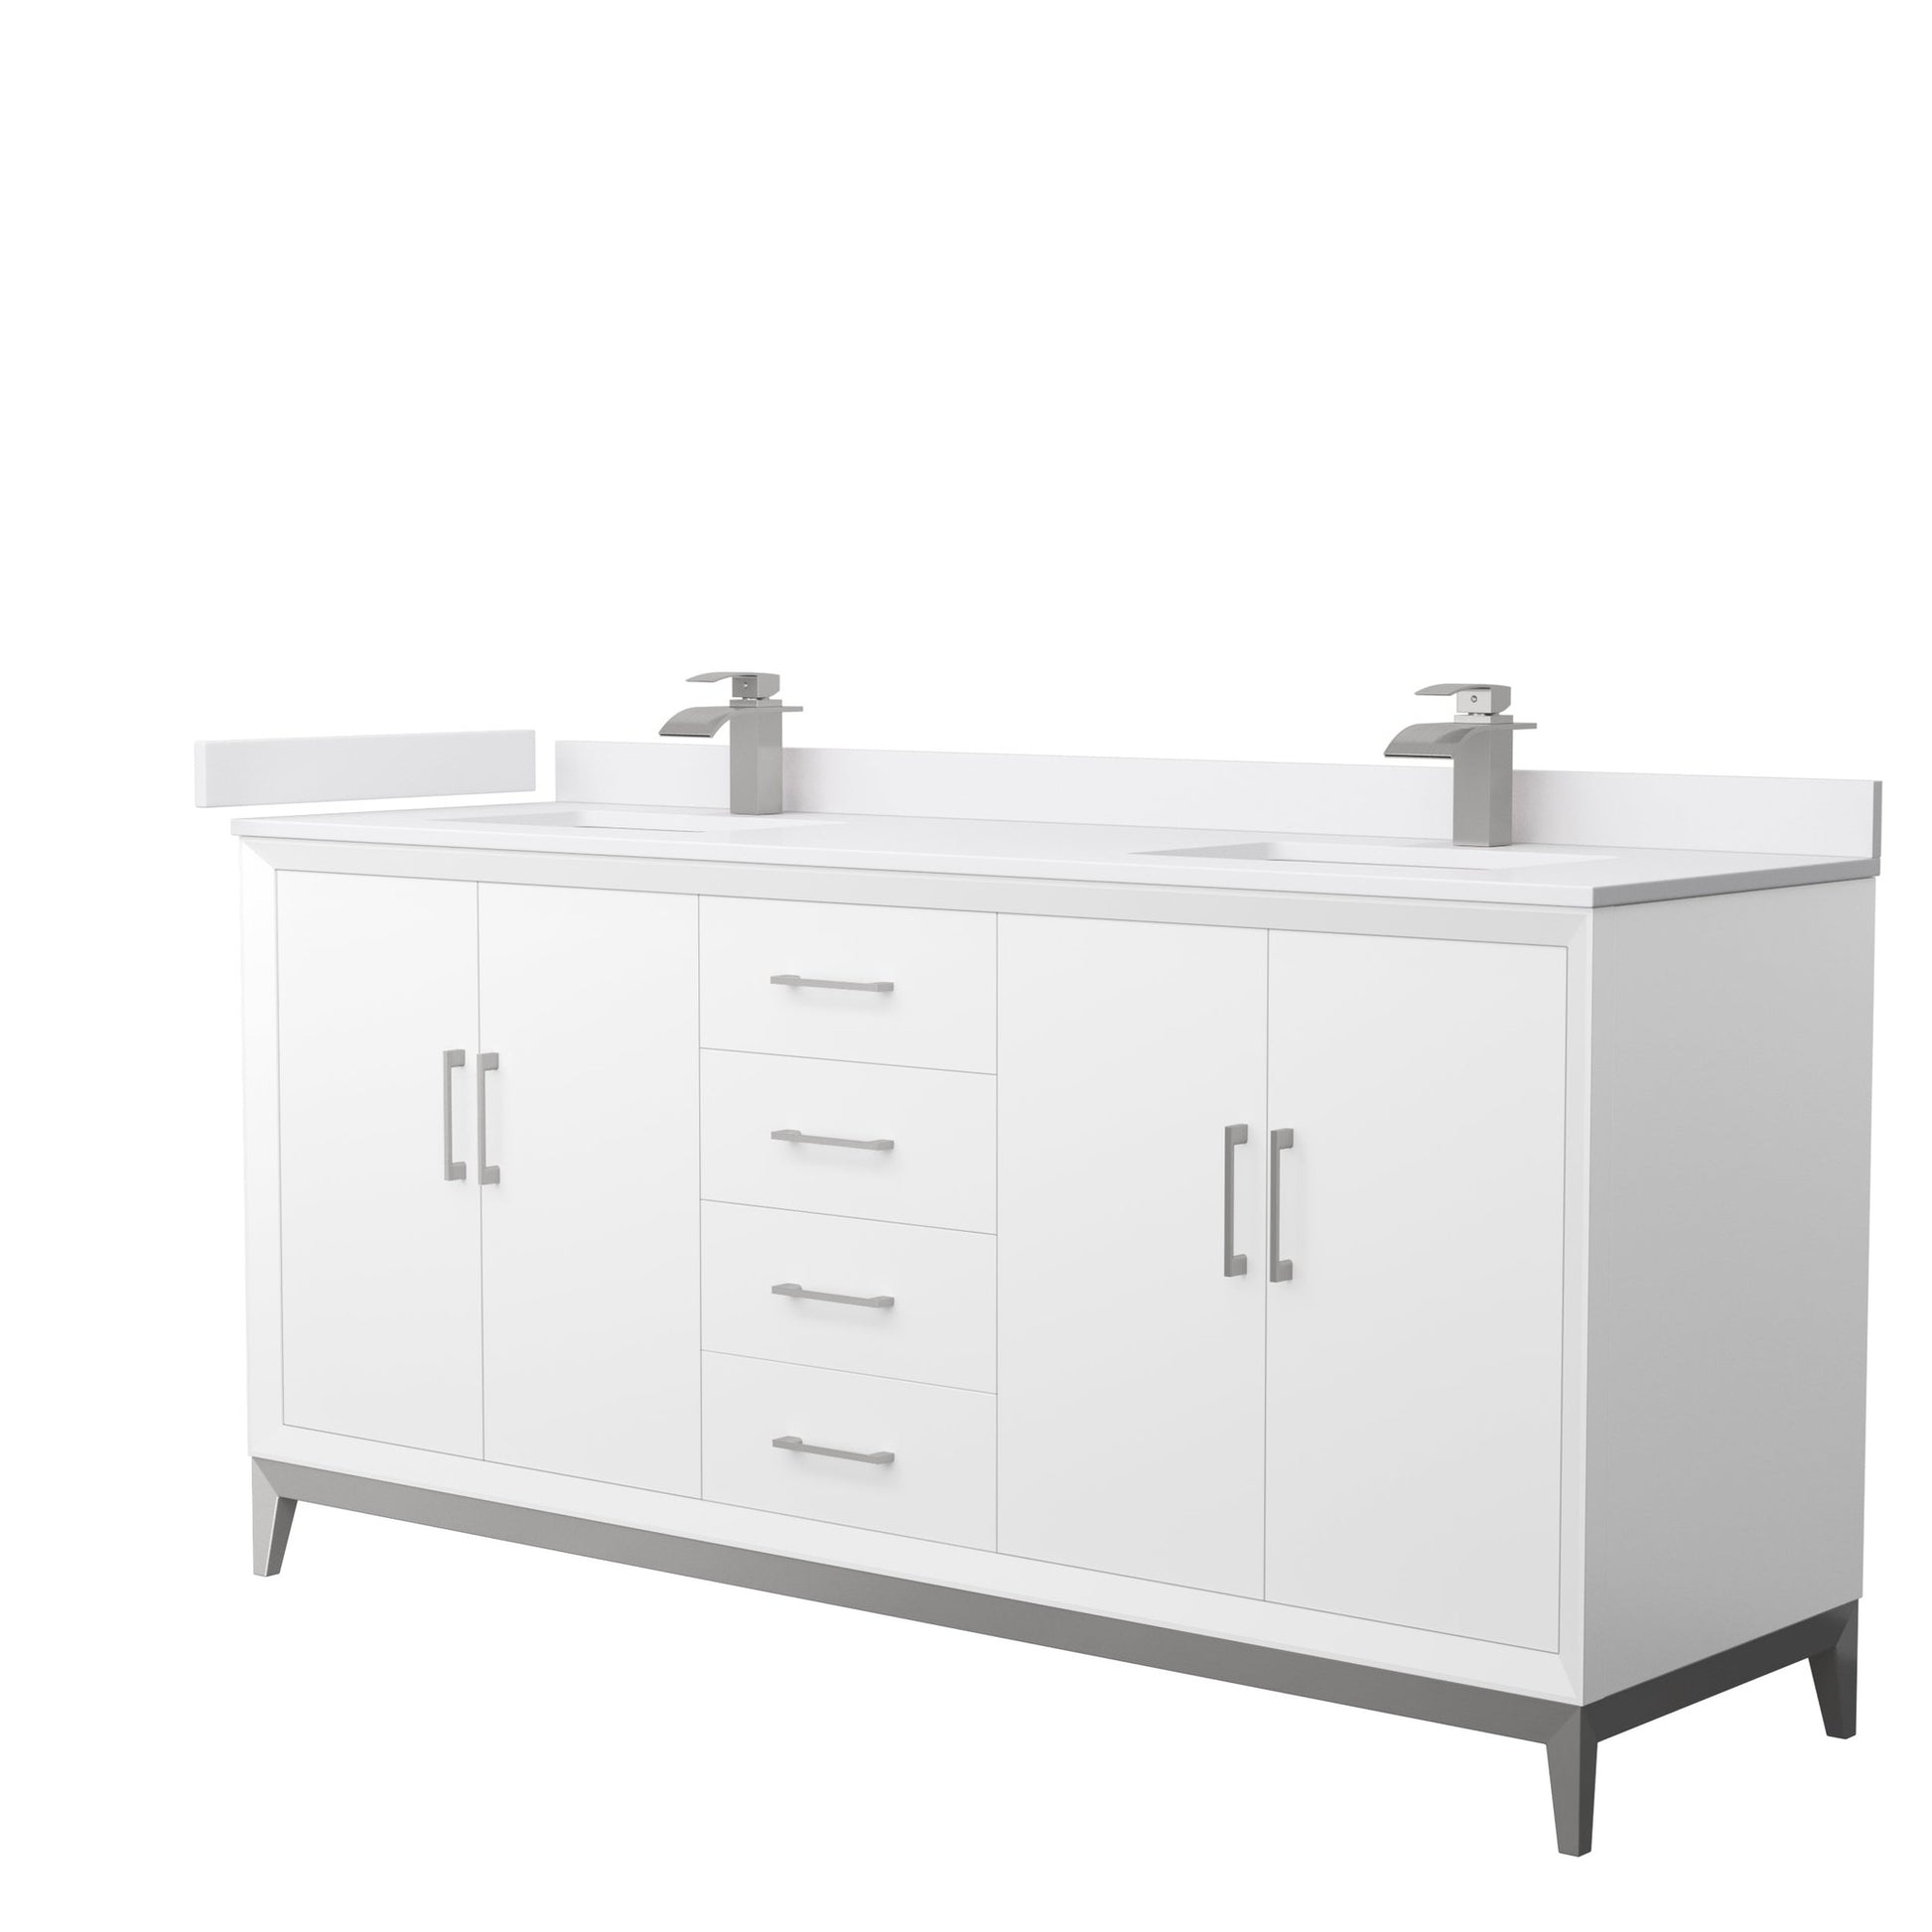 Wyndham Collection Amici 72" Double Bathroom Vanity in White, White Cultured Marble Countertop, Undermount Square Sinks, Brushed Nickel Trim